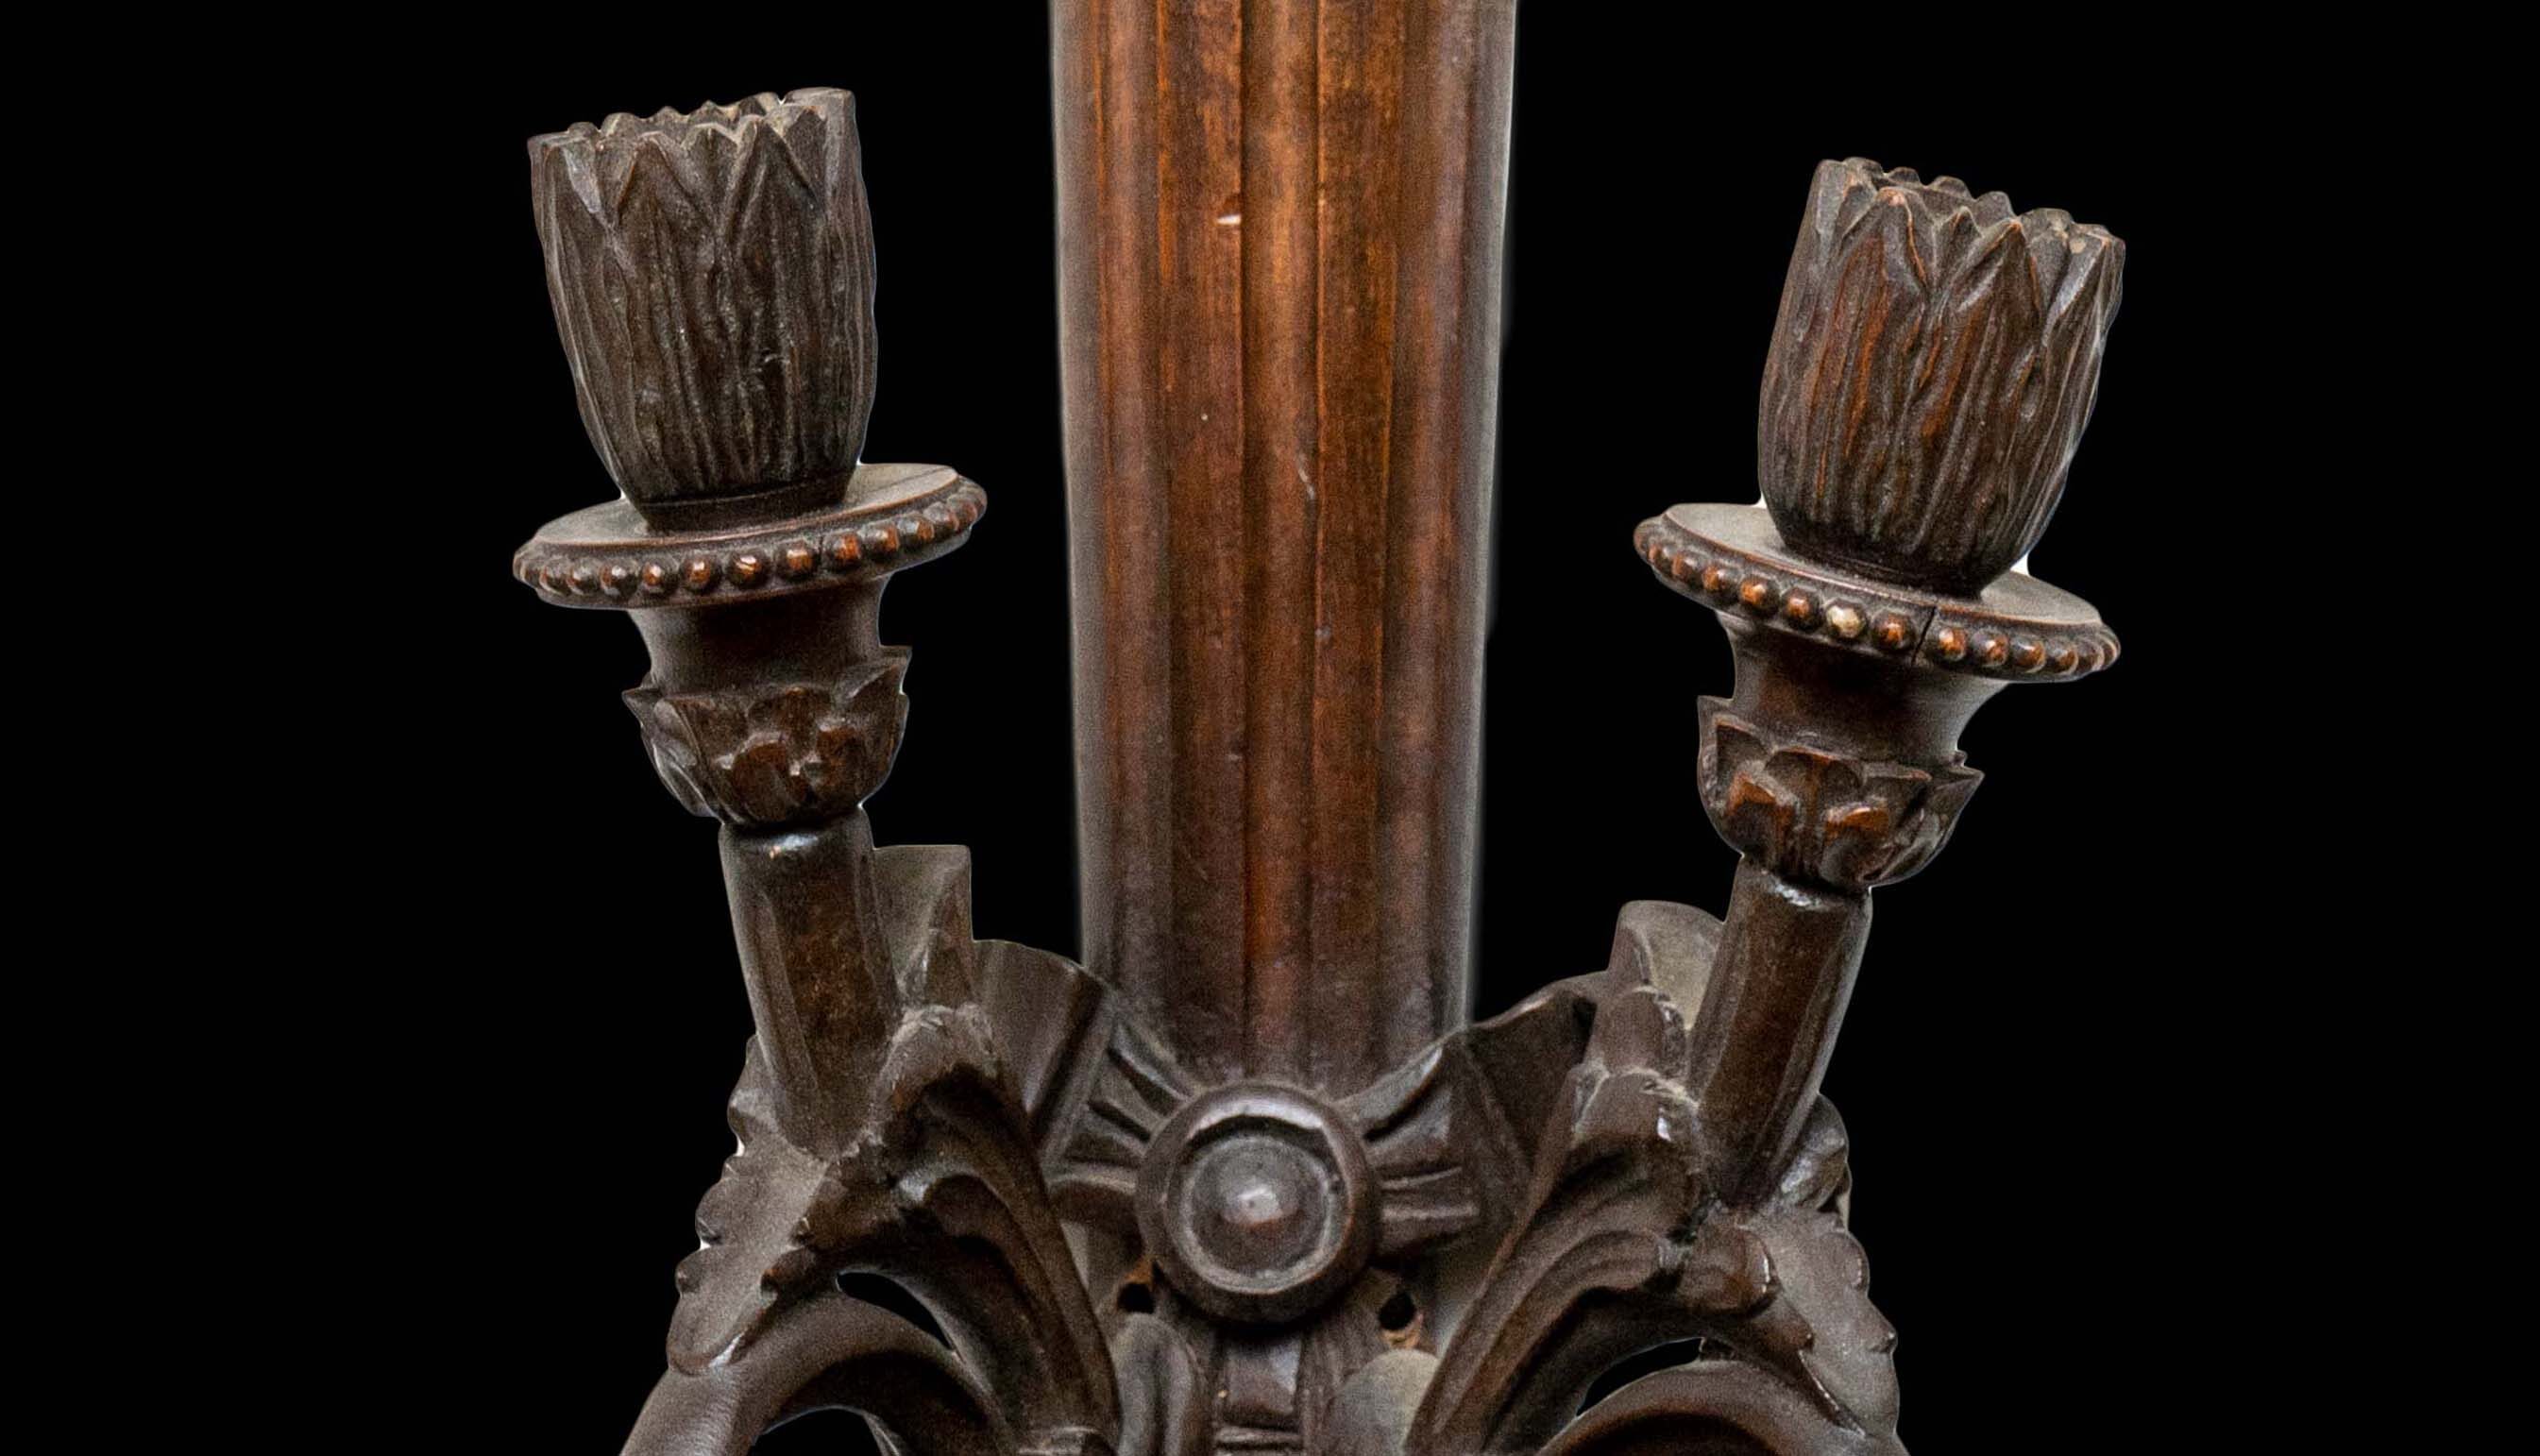 19th Century Pair of Two Arm Carved Wood Quiver Sconces with Carved Arrows